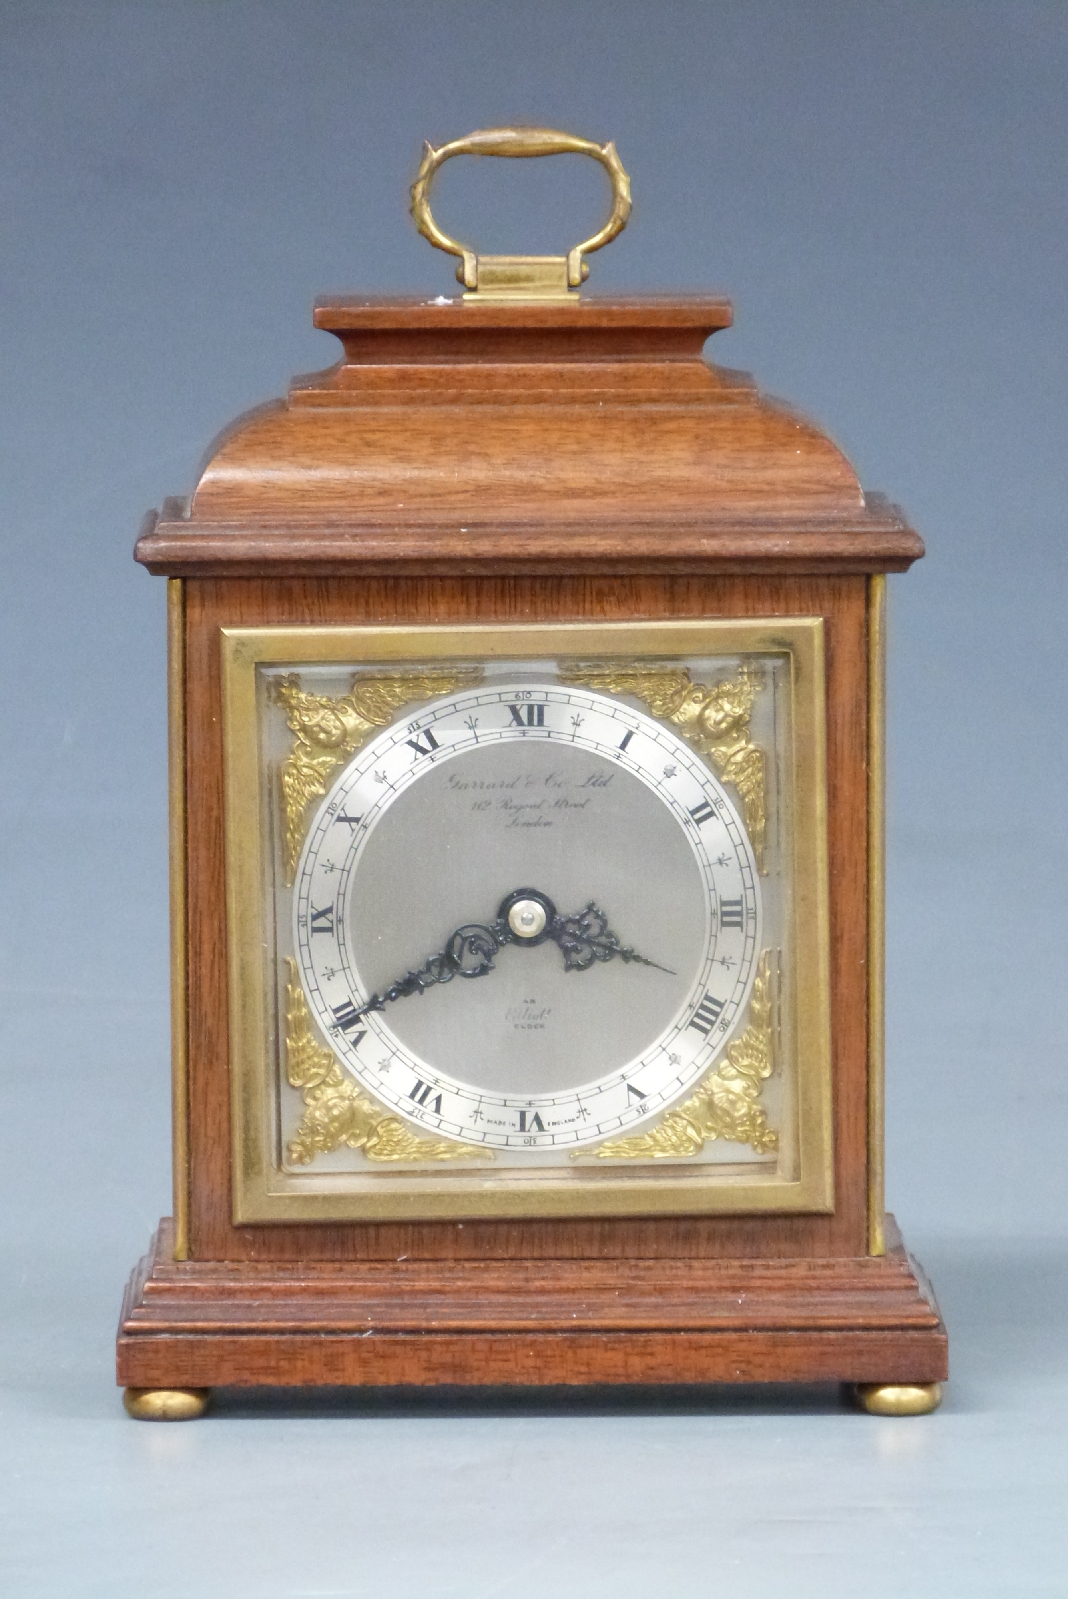 Elliott mantel clock in bell top mahogany case, the silvered Roman chapter ring with gilt cherub